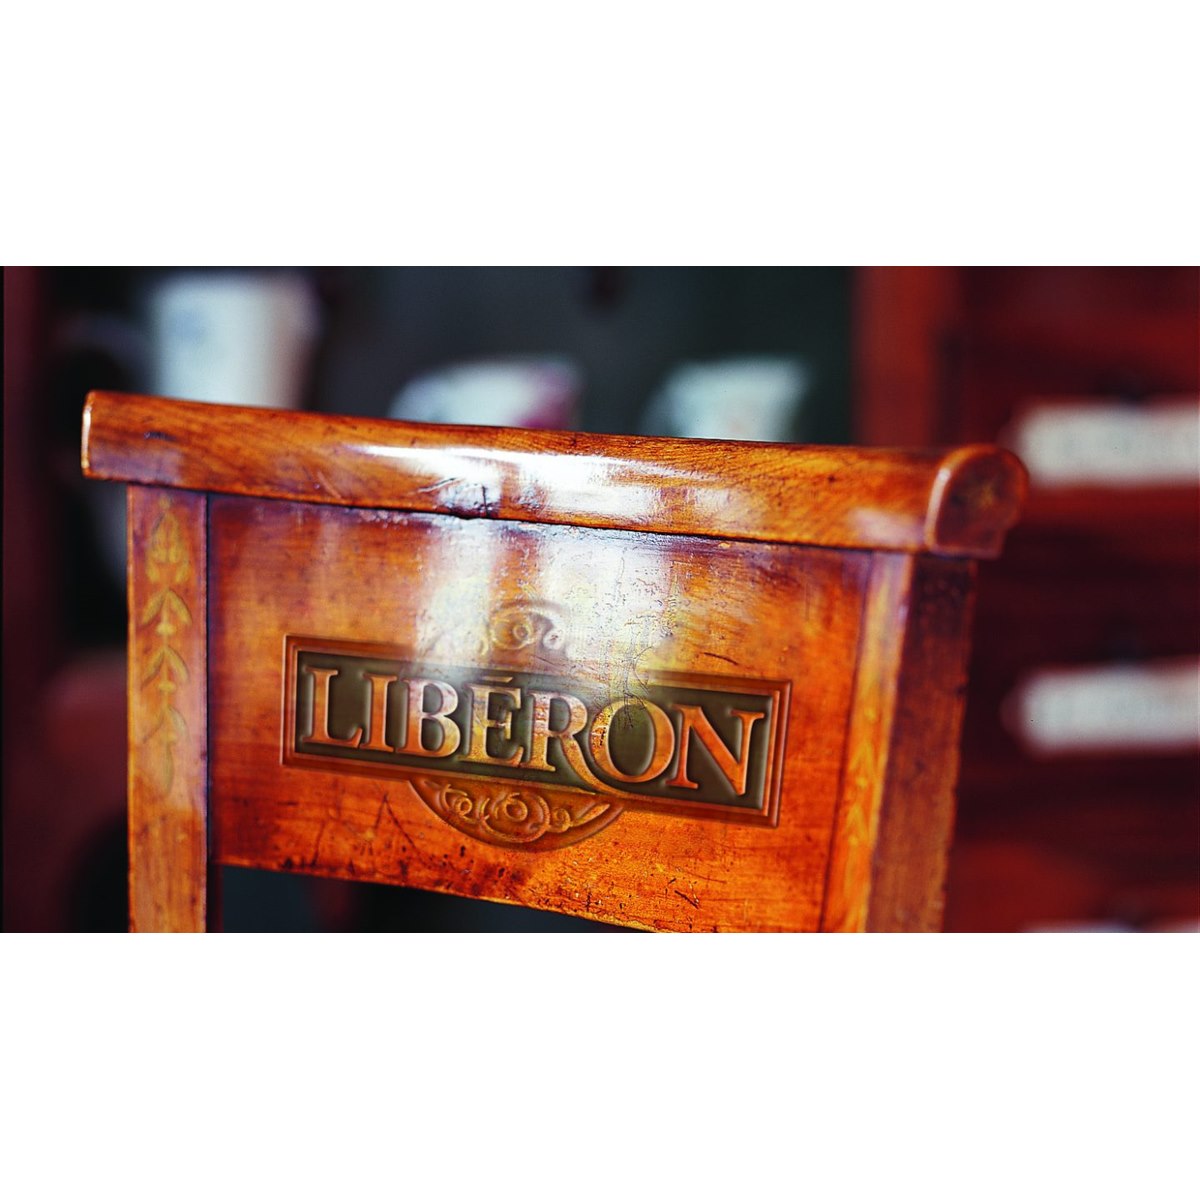 Where to buy Liberon Products